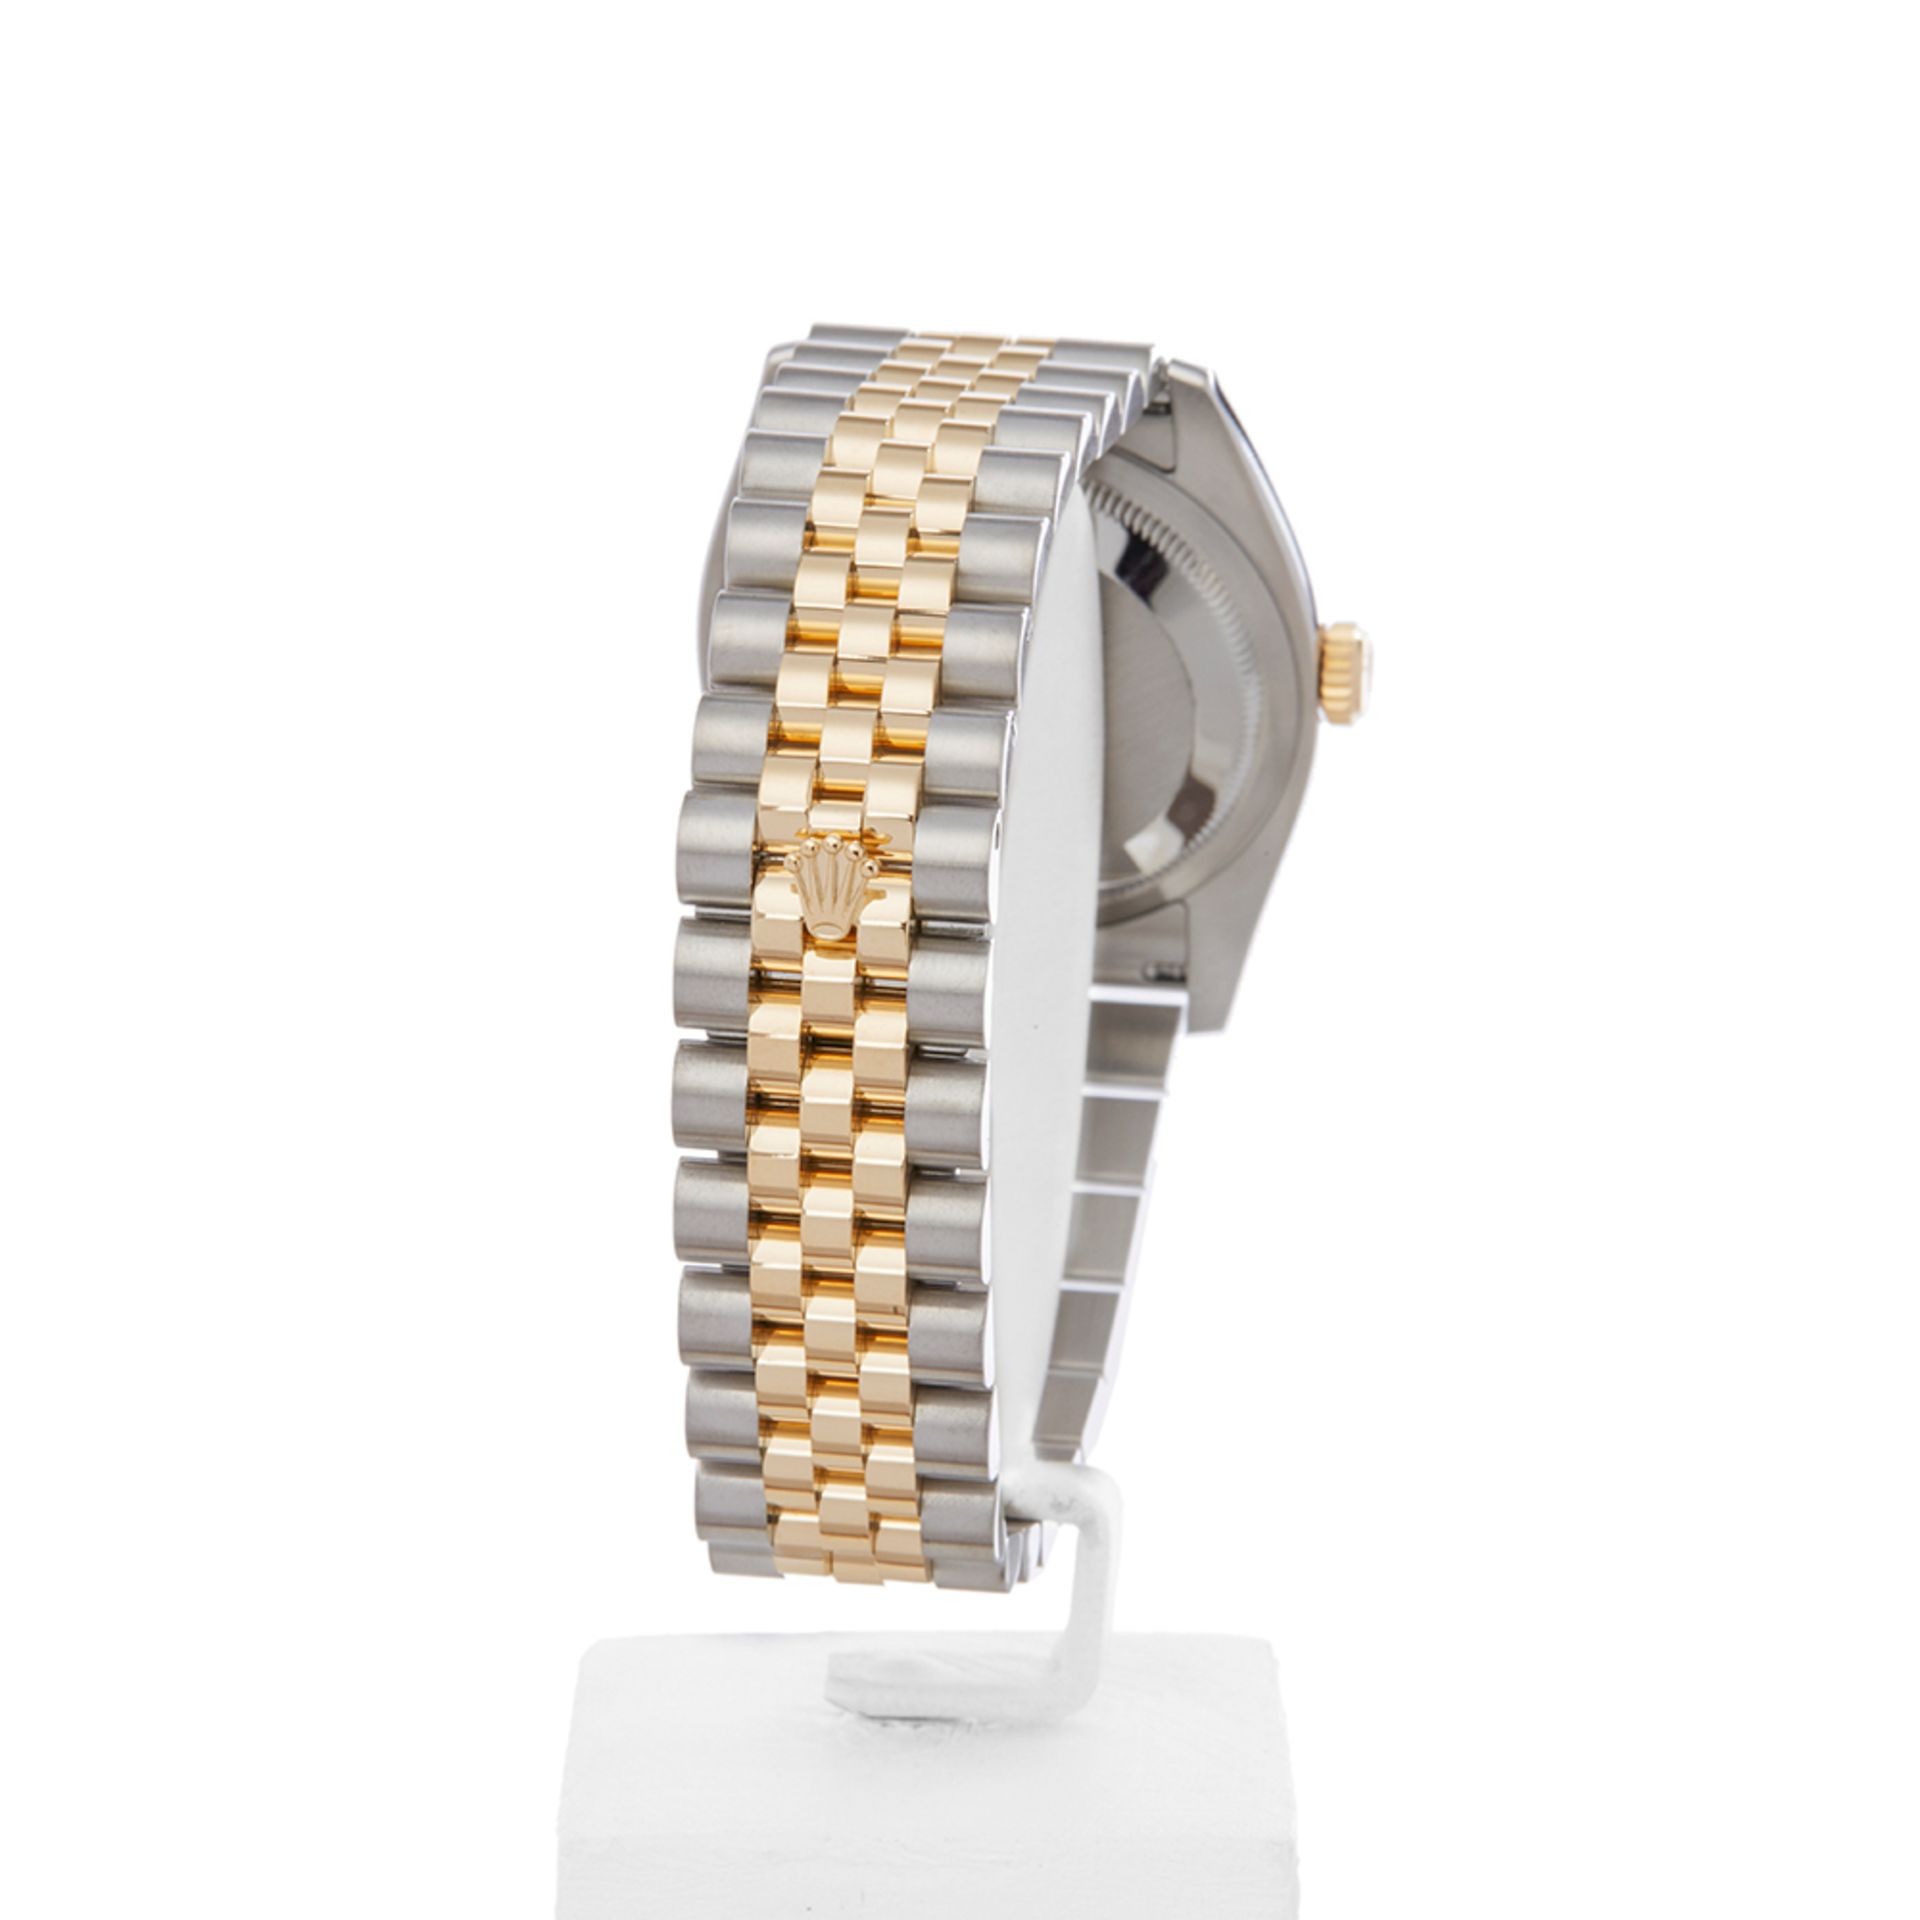 Datejust 36mm Stainless Steel & 18K Yellow Gold - 116233 - Image 7 of 8